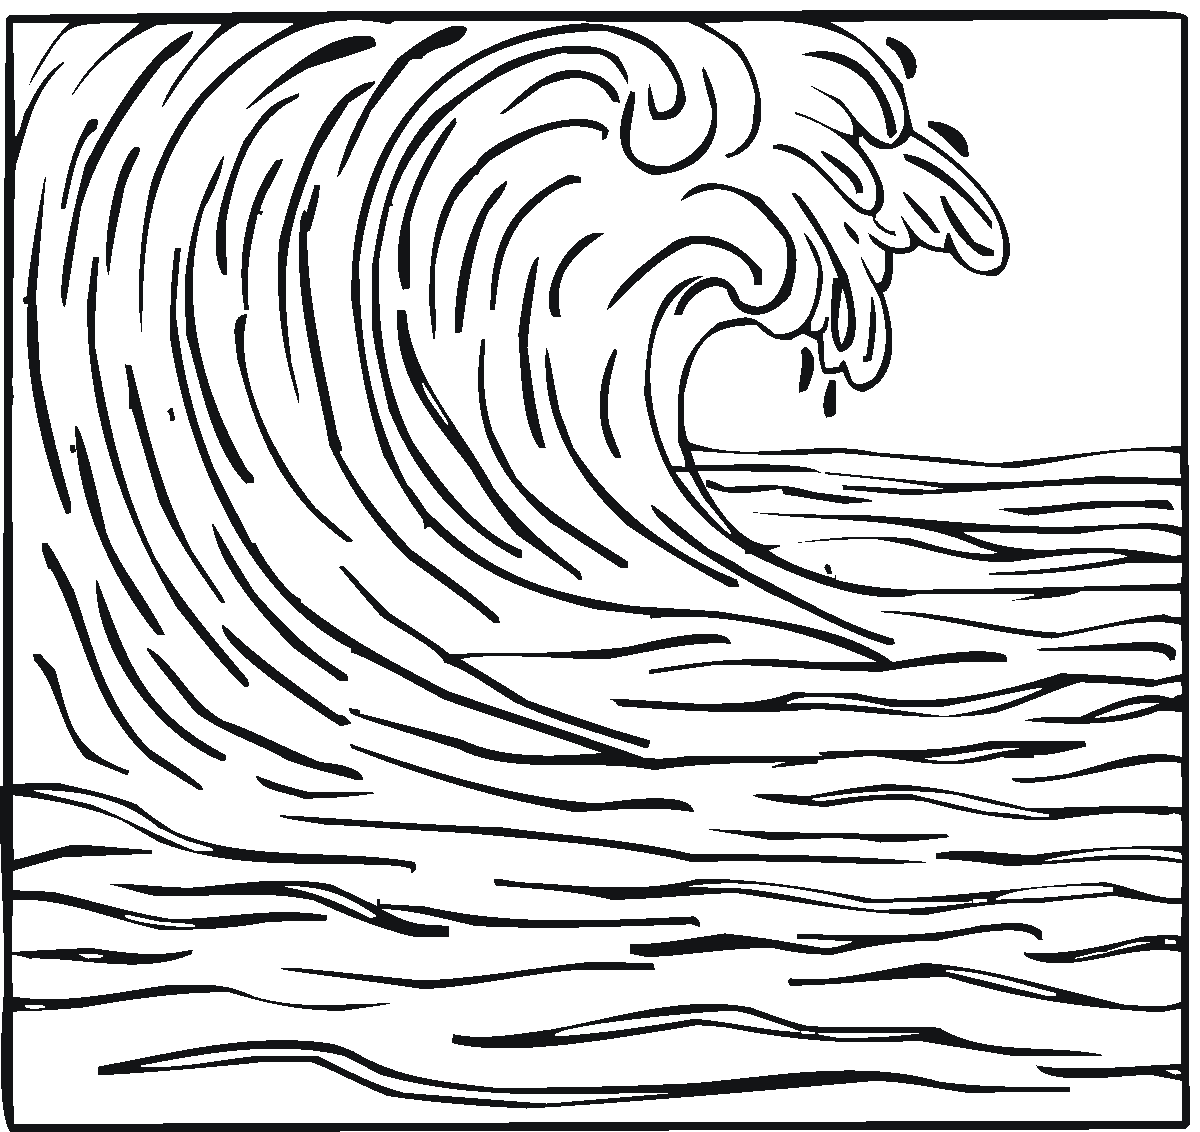 Waves coloring pages sketch coloring page ocean coloring pages coloring pages adult coloring pages